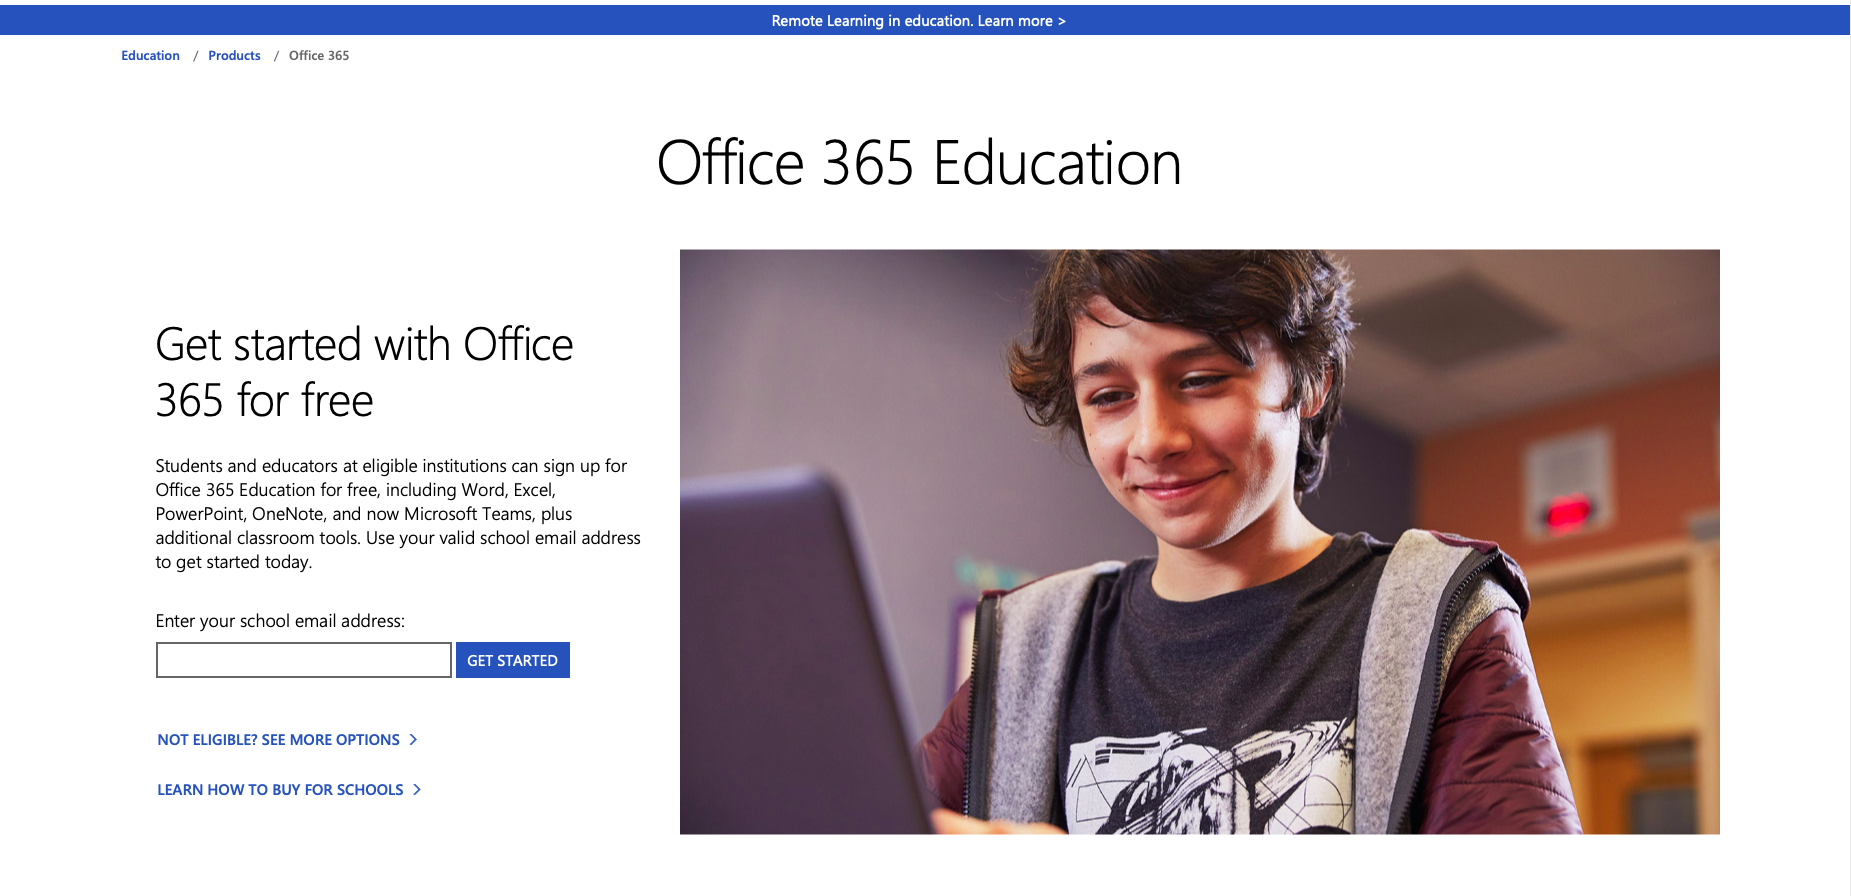 Install Microsoft Office 365 (Students/Faculty/Staff) - Powered by Kayako  fusion Help Desk Software